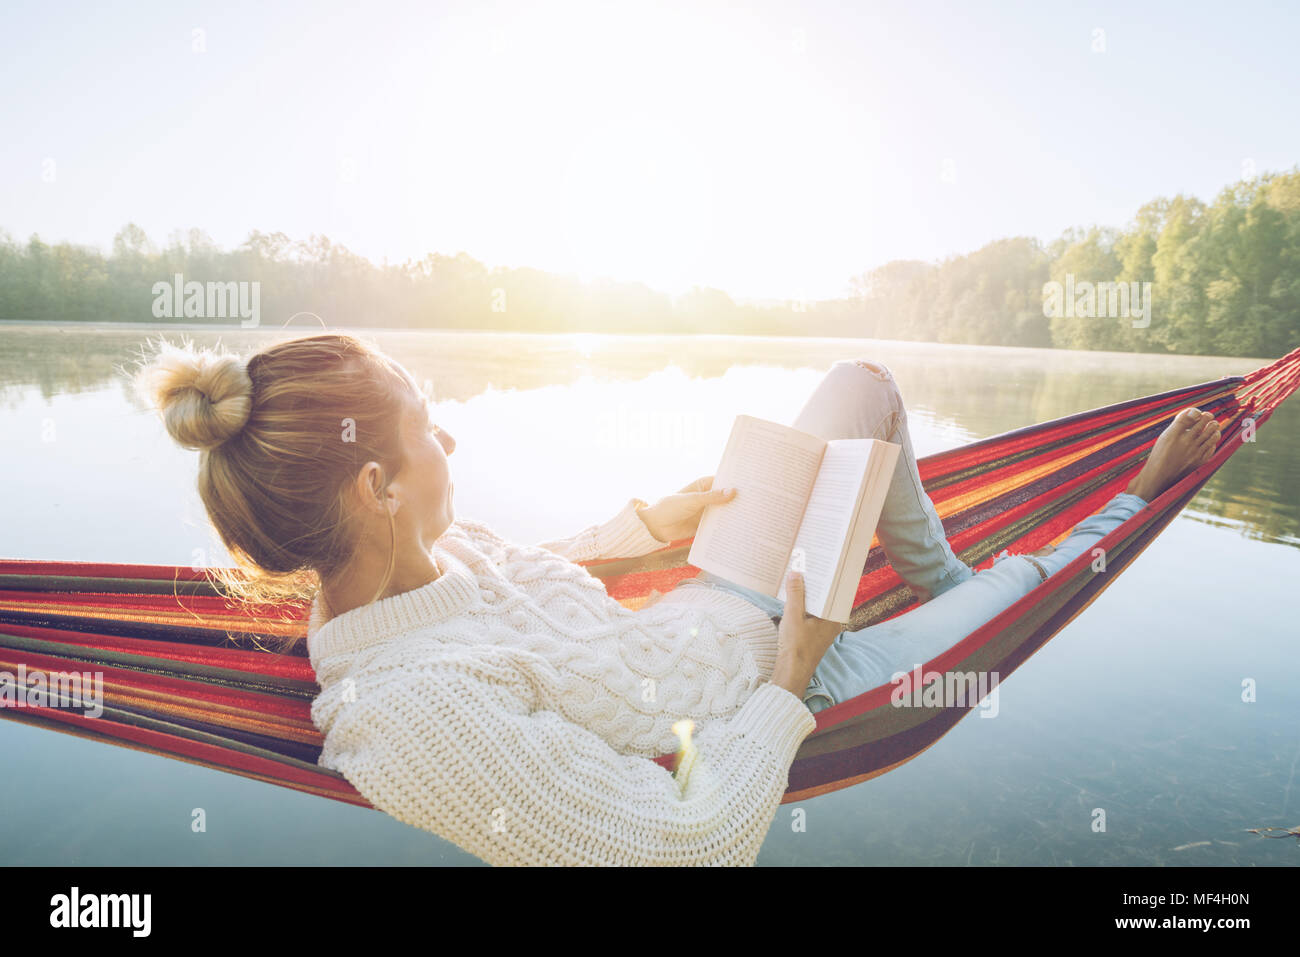 Young woman relaxing on hammock by the lake at sunrise reading a book. People travel relaxation wellbeing learning concept. France, Europe Stock Photo